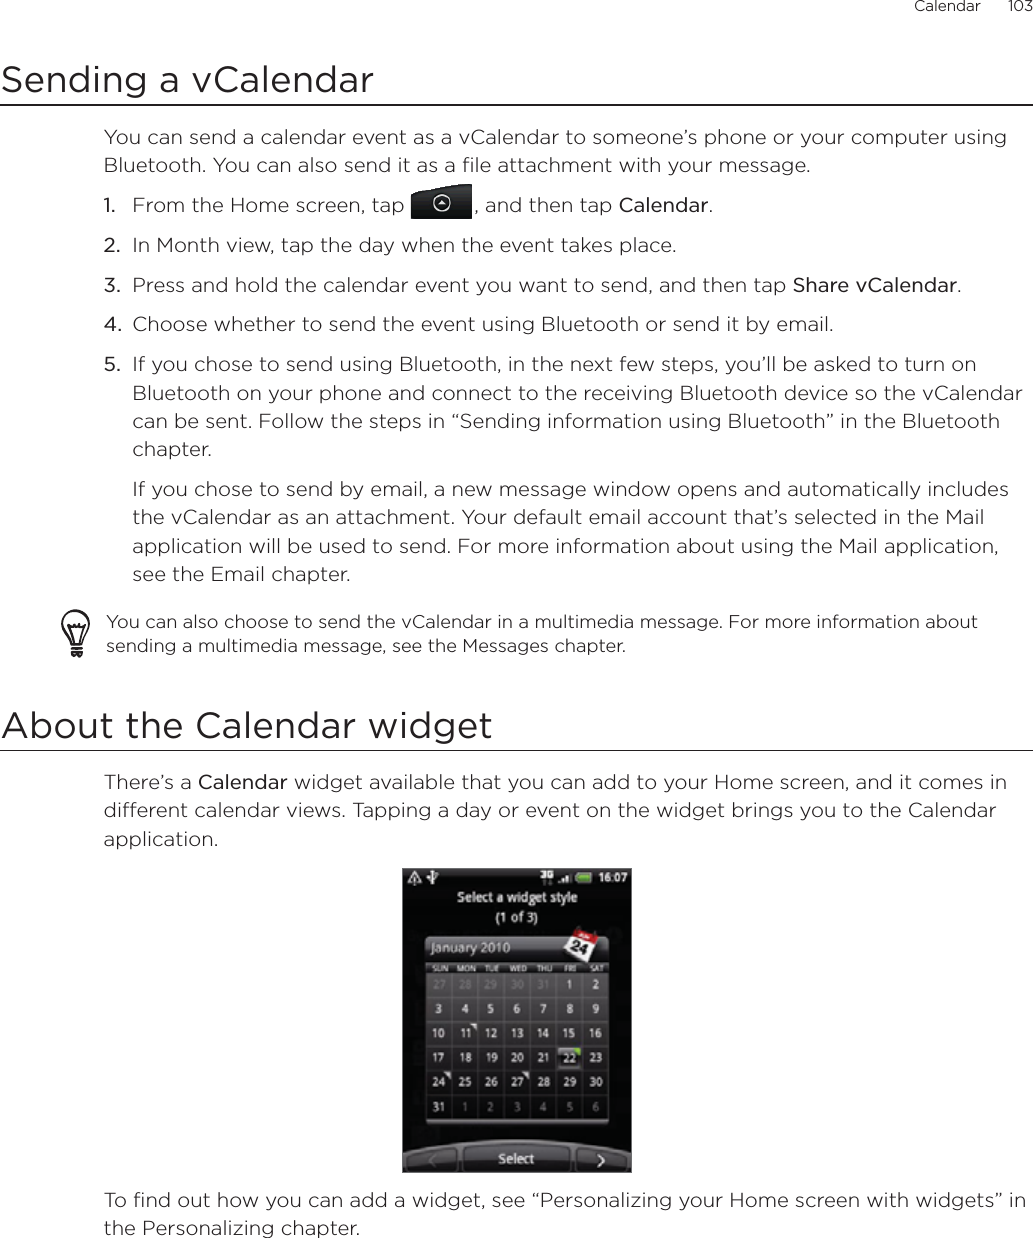 Calendar      103Sending a vCalendarYou can send a calendar event as a vCalendar to someone’s phone or your computer using Bluetooth. You can also send it as a file attachment with your message.From the Home screen, tap  , and then tap Calendar.In Month view, tap the day when the event takes place.Press and hold the calendar event you want to send, and then tap Share vCalendar.Choose whether to send the event using Bluetooth or send it by email.If you chose to send using Bluetooth, in the next few steps, you’ll be asked to turn on Bluetooth on your phone and connect to the receiving Bluetooth device so the vCalendar can be sent. Follow the steps in “Sending information using Bluetooth” in the Bluetooth chapter.If you chose to send by email, a new message window opens and automatically includes the vCalendar as an attachment. Your default email account that’s selected in the Mail application will be used to send. For more information about using the Mail application, see the Email chapter.You can also choose to send the vCalendar in a multimedia message. For more information about sending a multimedia message, see the Messages chapter.About the Calendar widgetThere’s a Calendar widget available that you can add to your Home screen, and it comes in different calendar views. Tapping a day or event on the widget brings you to the Calendar application. To find out how you can add a widget, see “Personalizing your Home screen with widgets” in the Personalizing chapter.1.2.3.4.5.